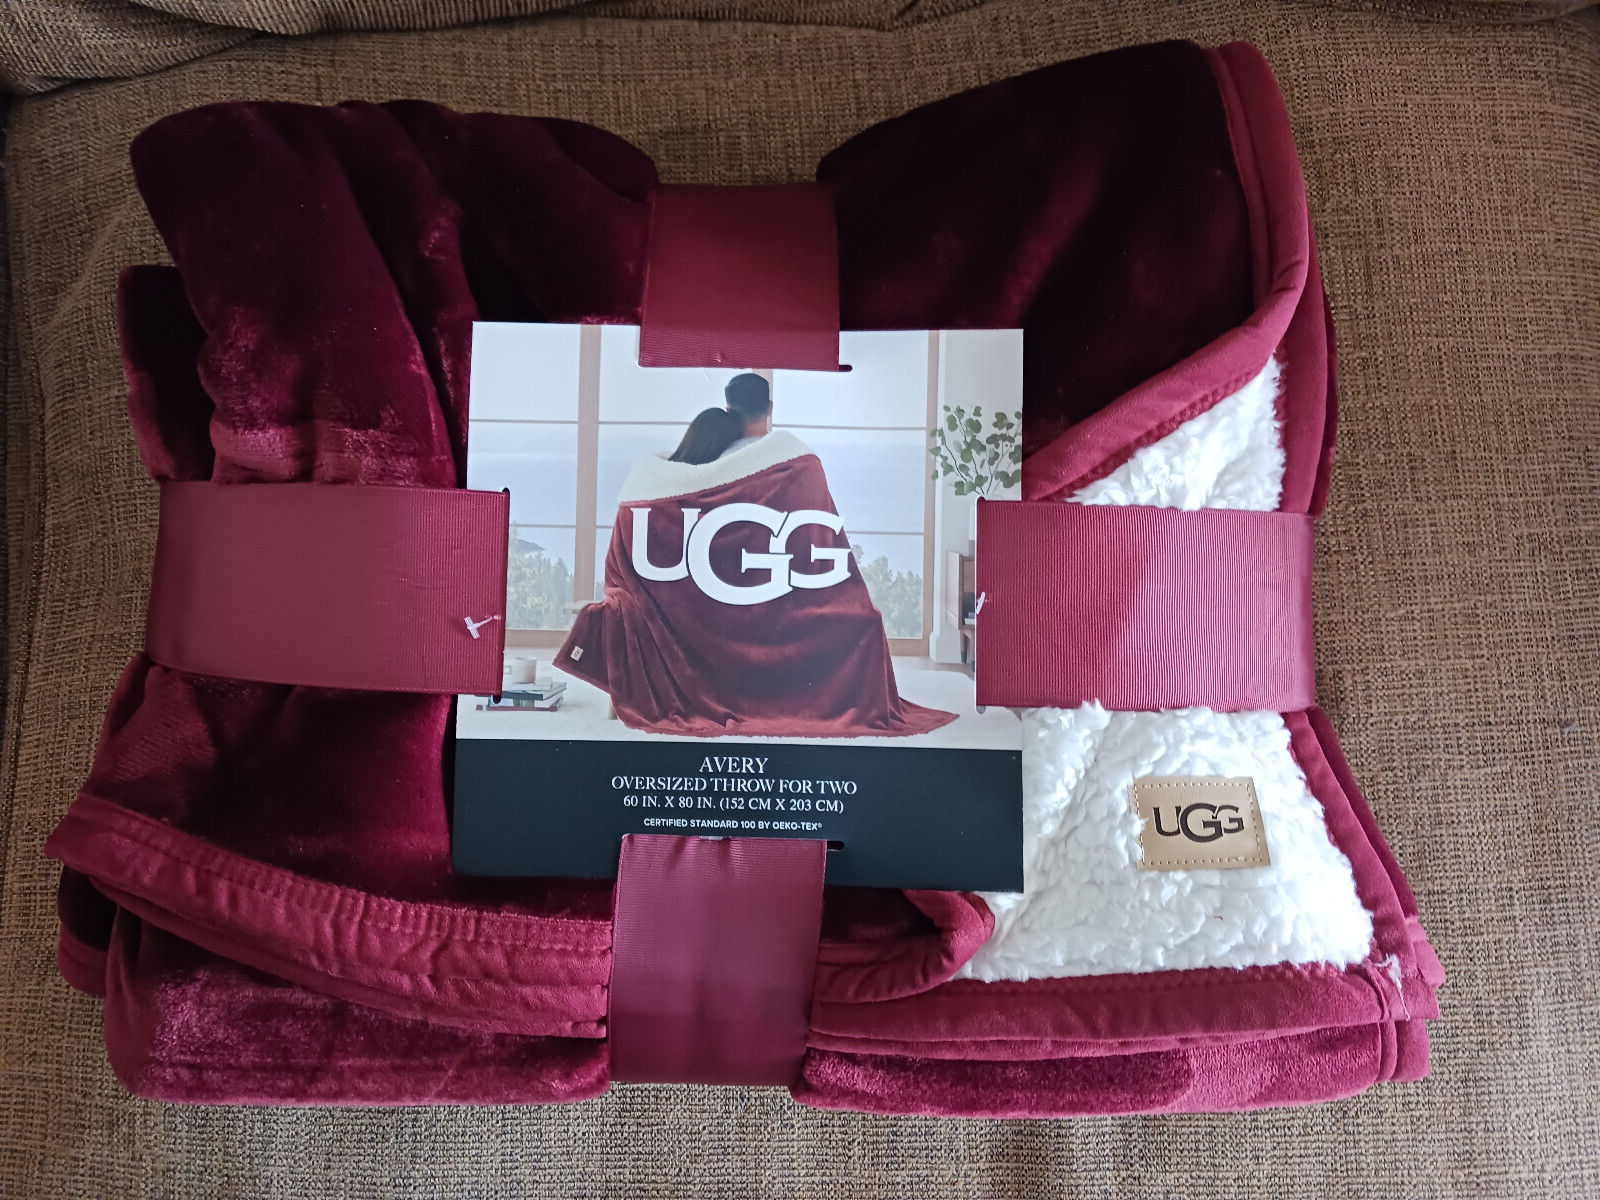 Ugg Avery Oversized Blanket/ Throw For Two 60”X80” Red Autumn